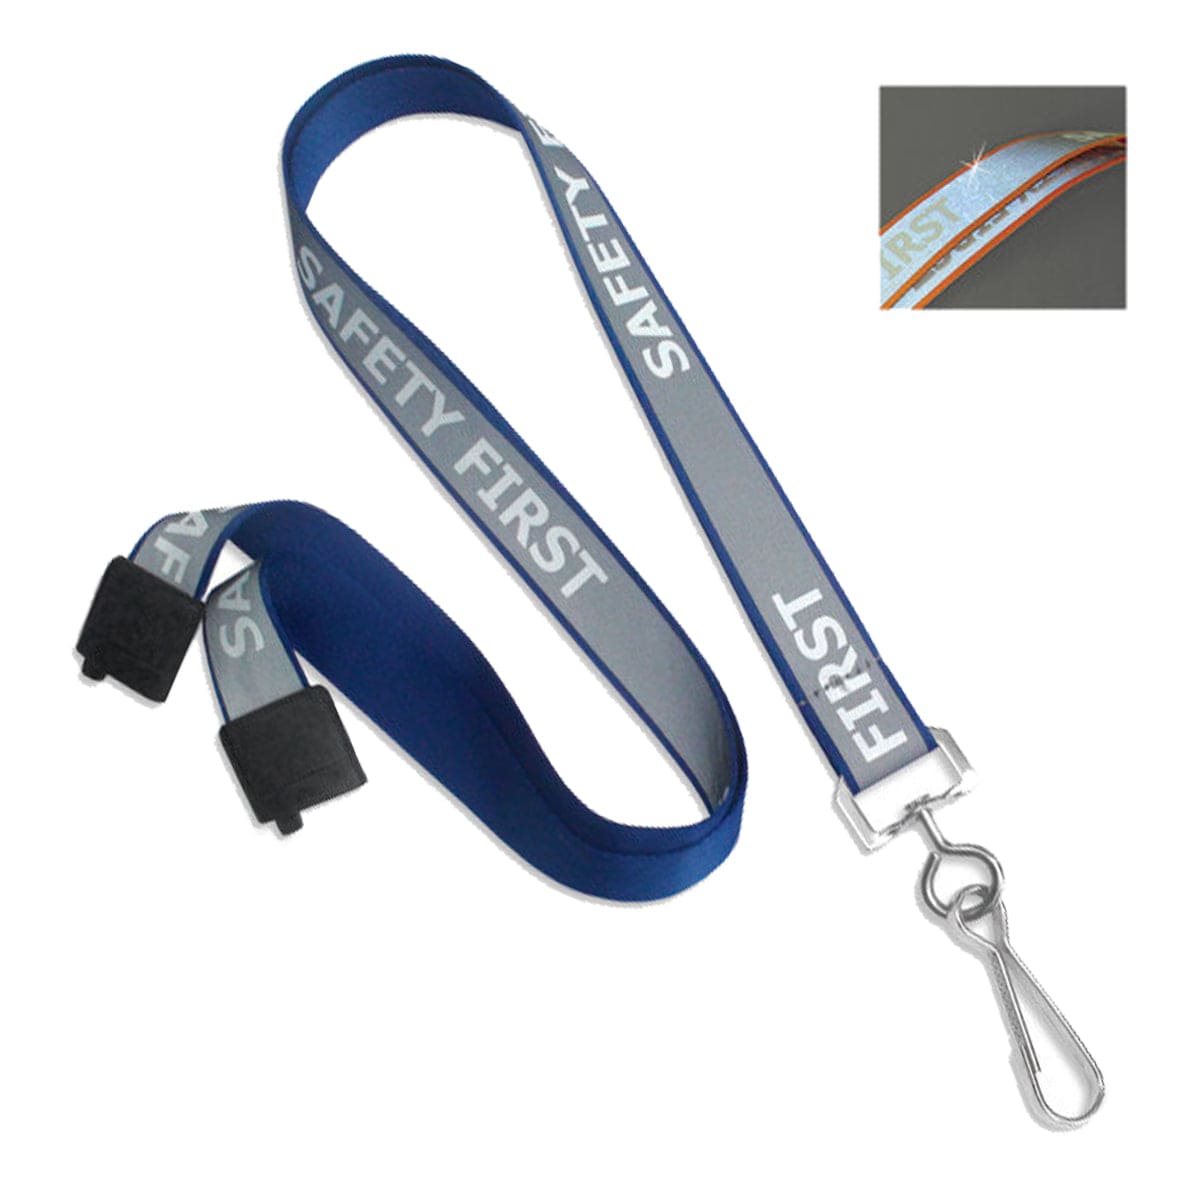 Reflective "Safety First" Printed ID Neck Lanyard With Metal Swivel Hook 2135-25XX